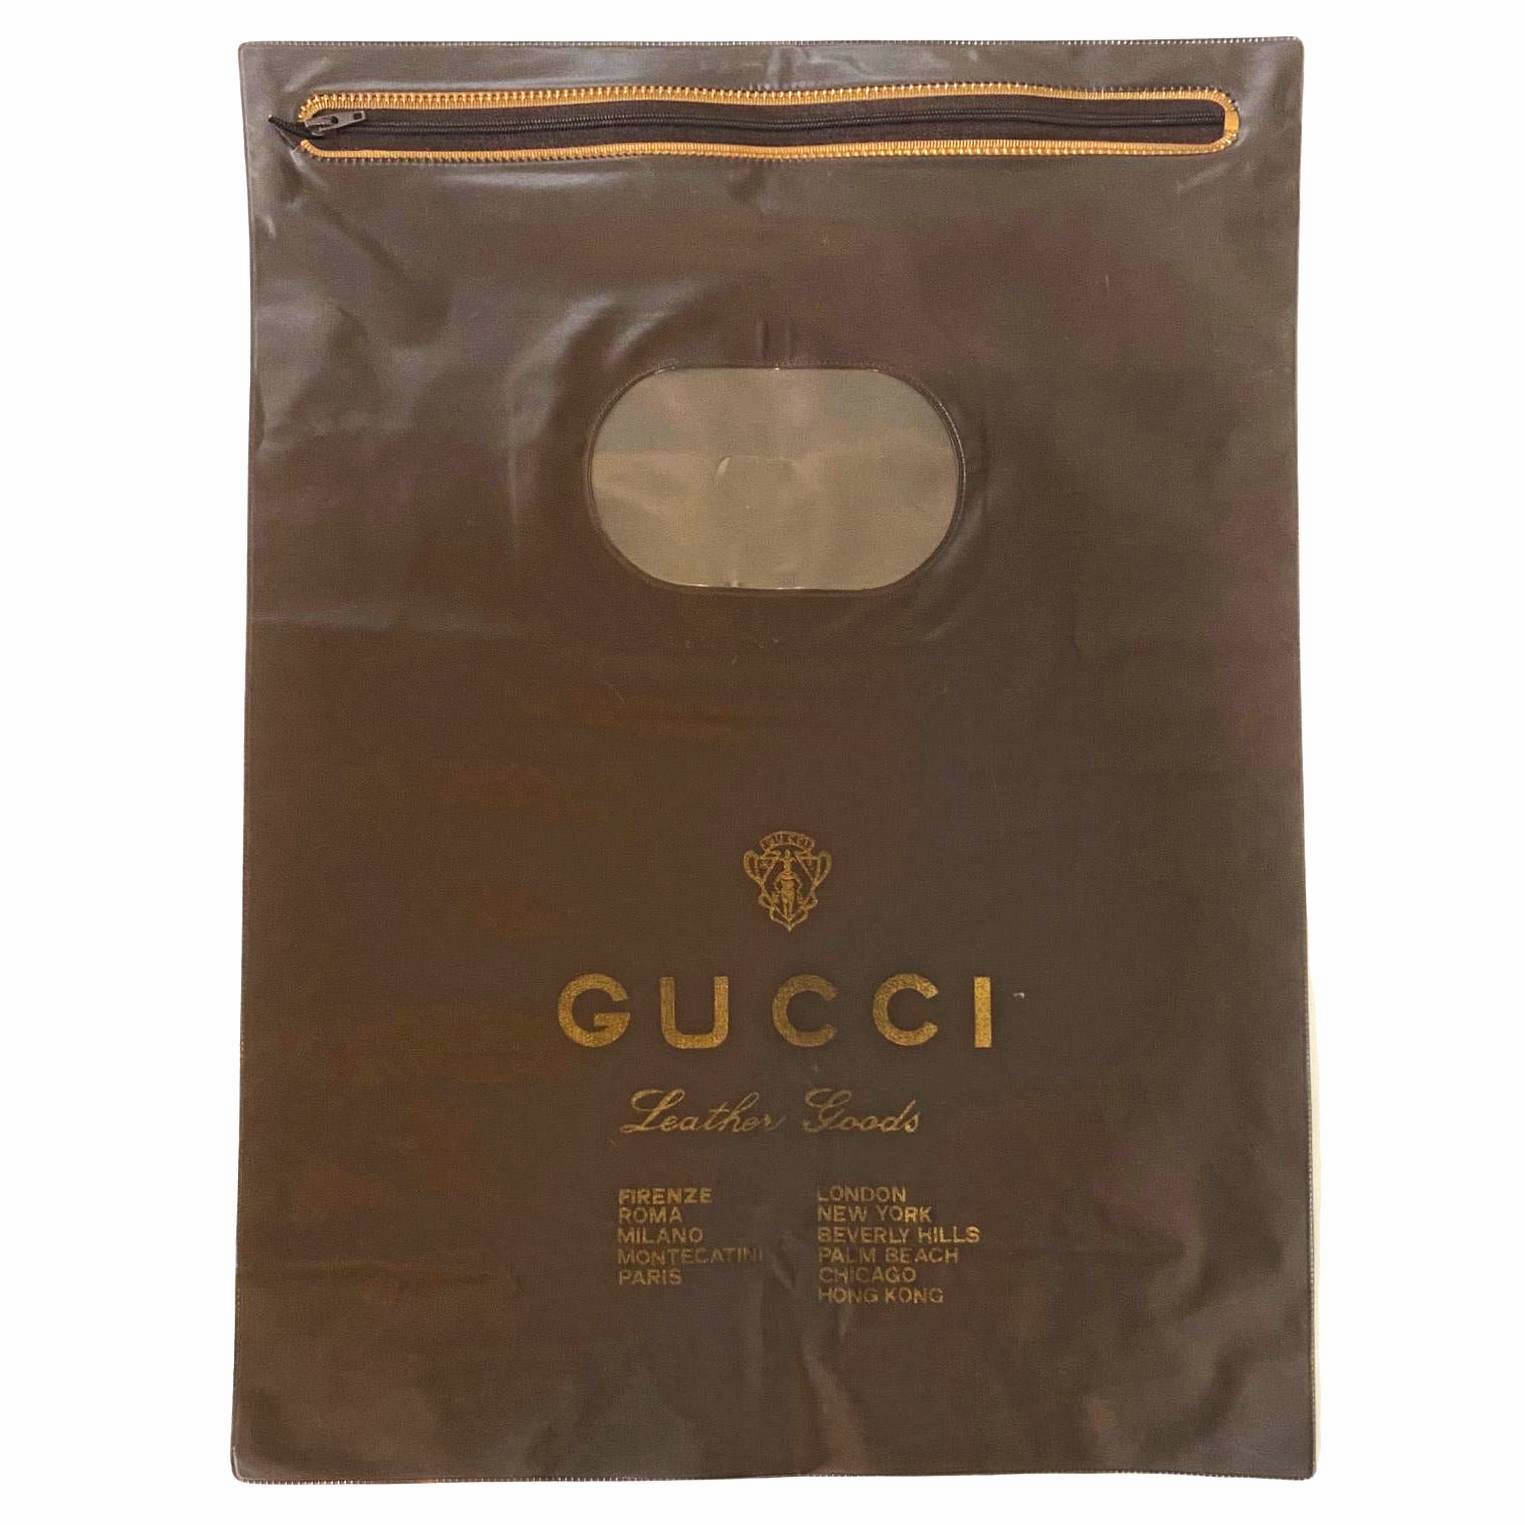 1960s Gucci Travel Dust Cover Bag - style - CHNGR